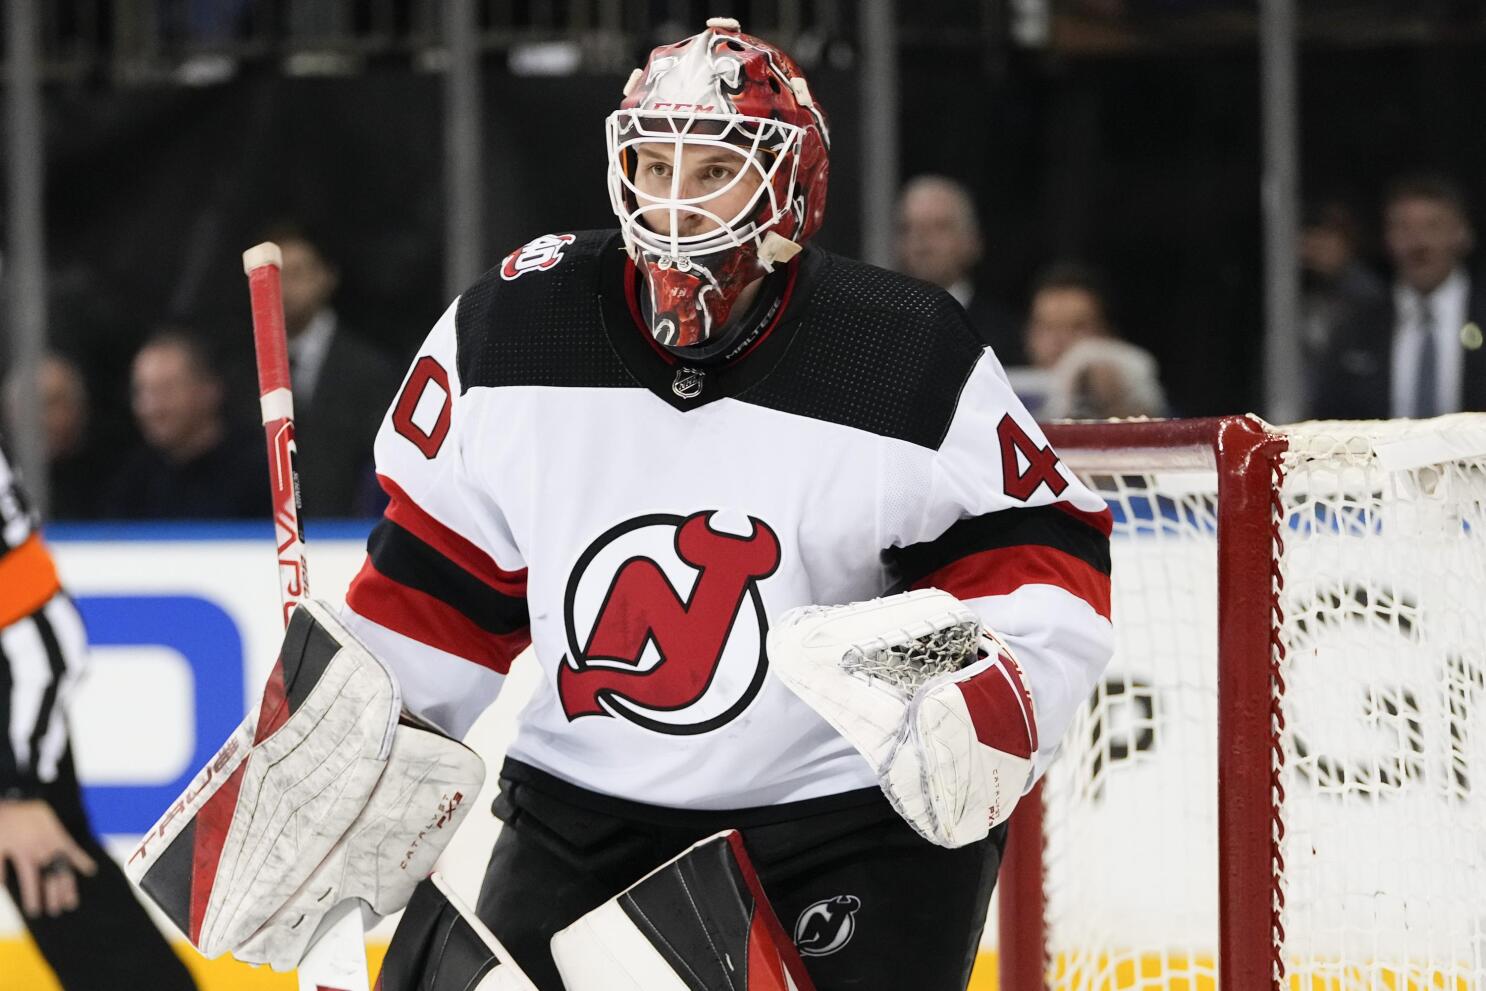 Devils announce details for five minor-league hockey games at